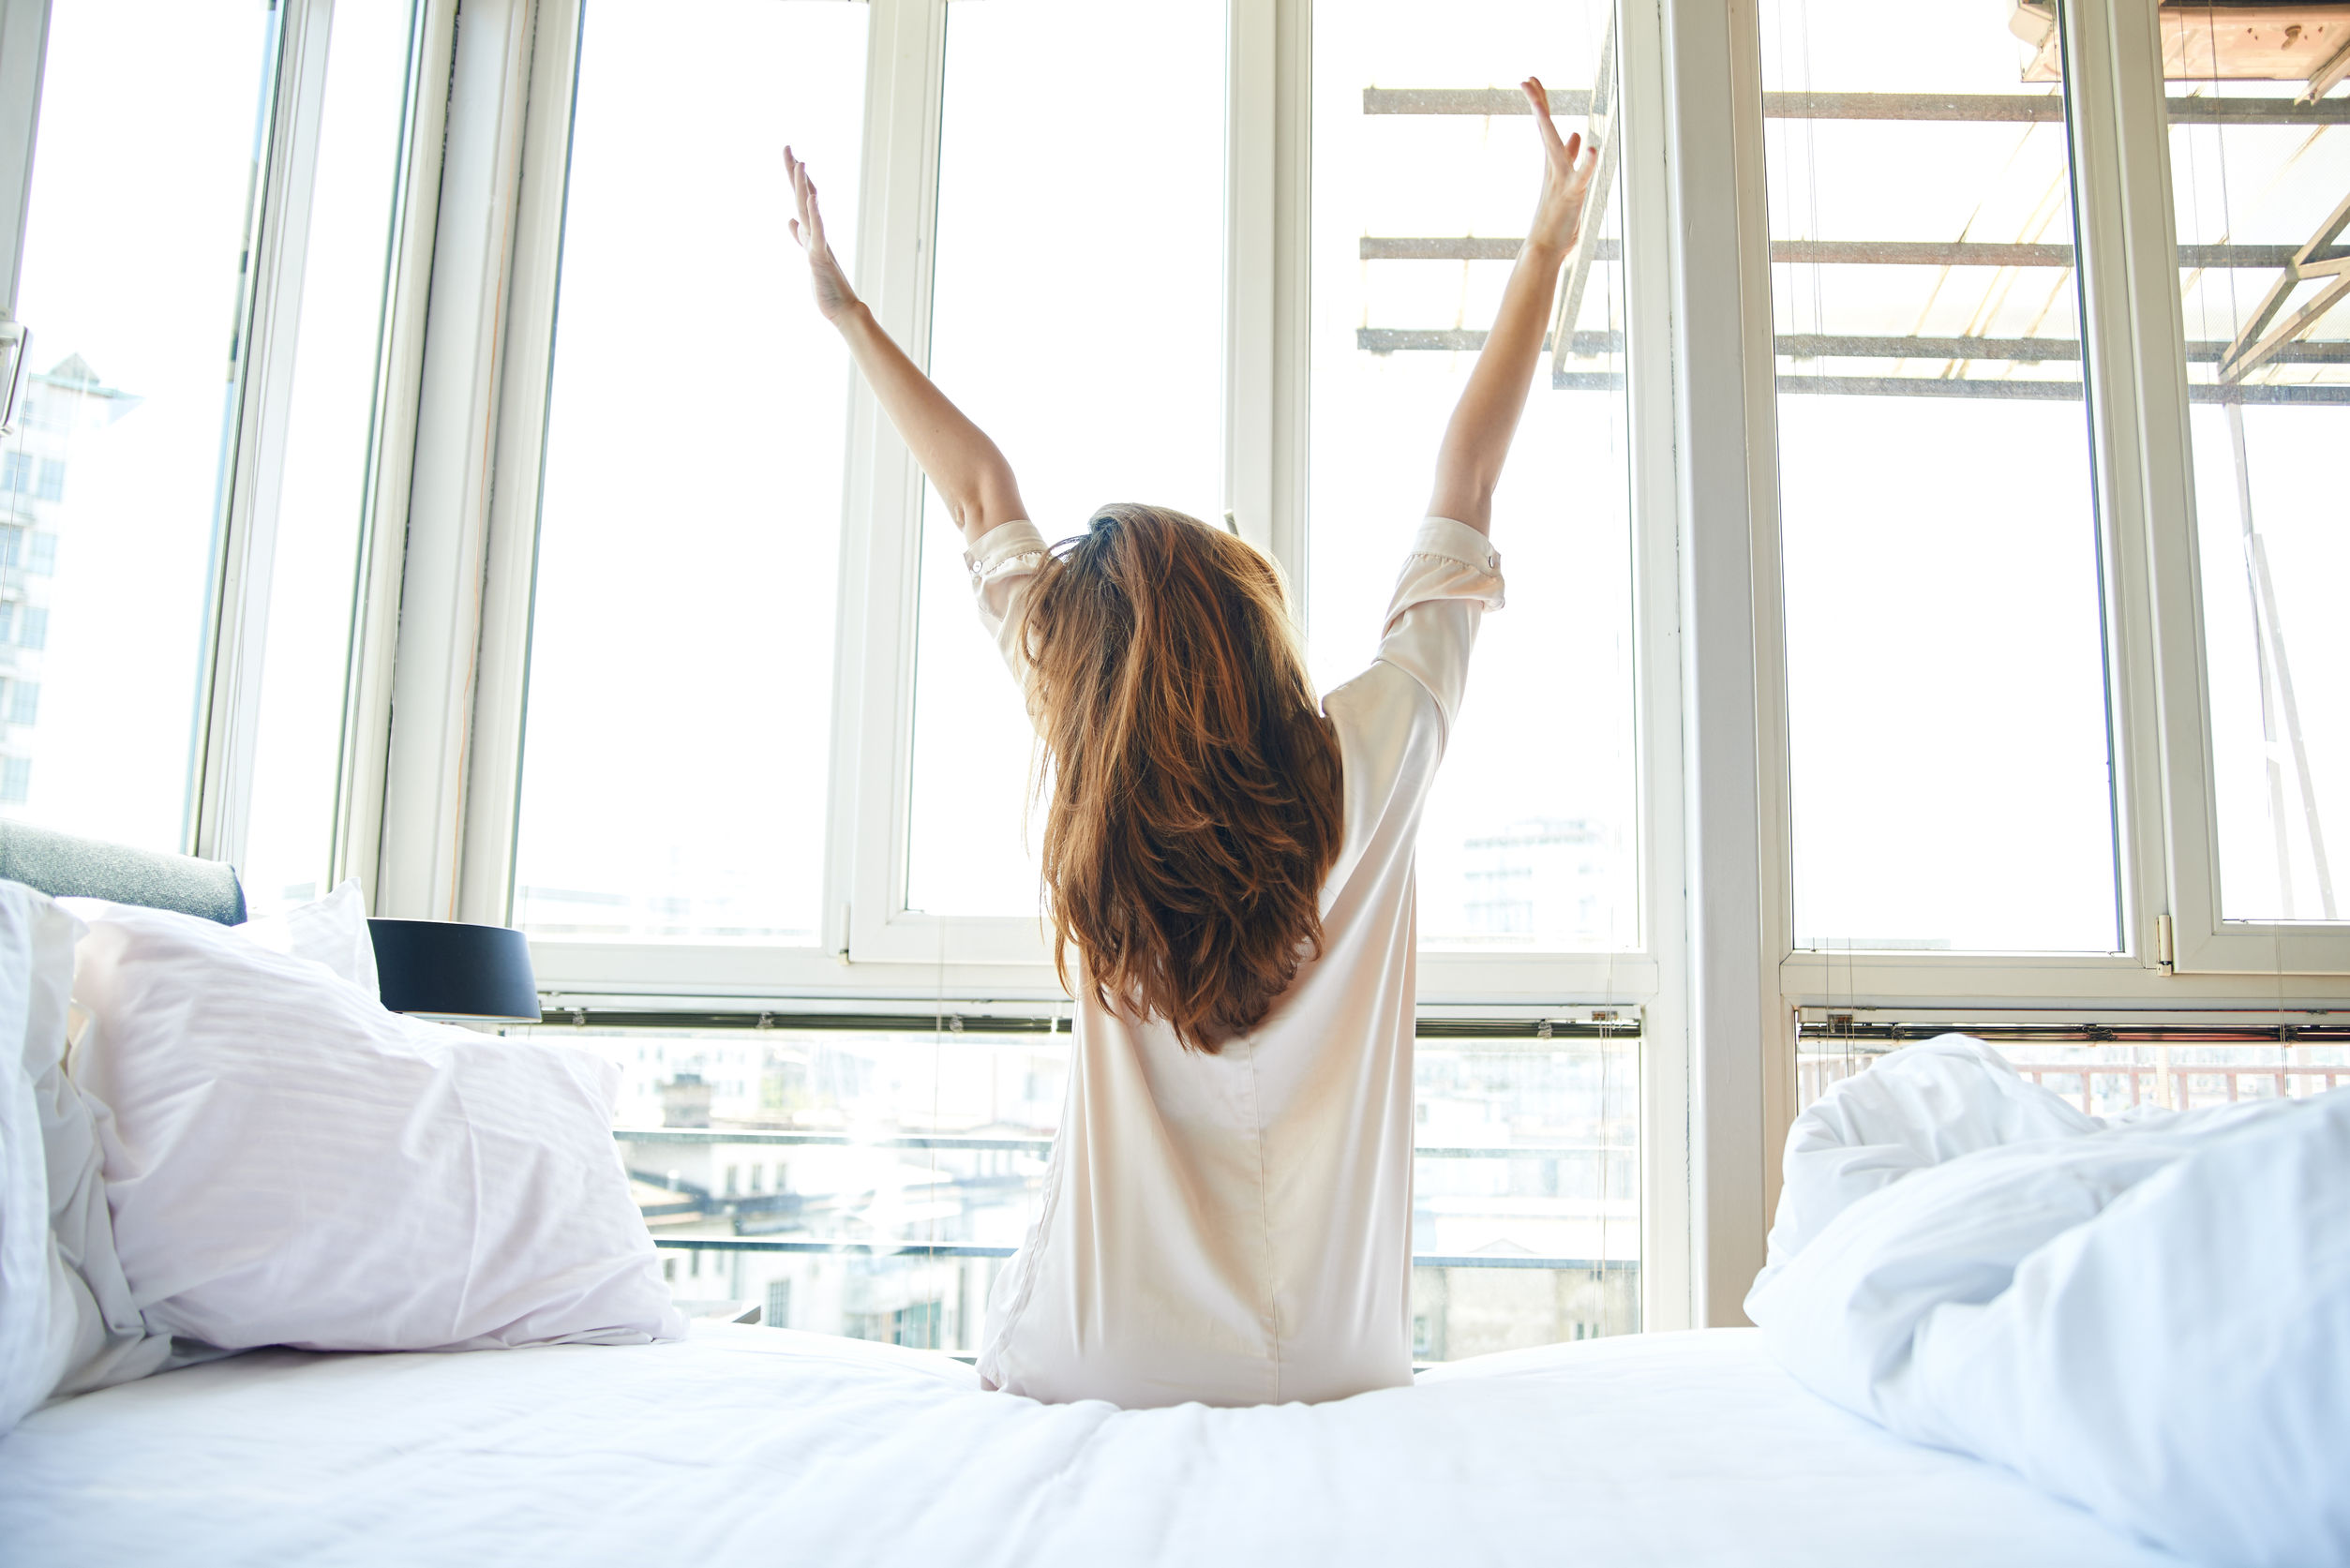 This is the best way to start the day, according to a Harvard psychologist